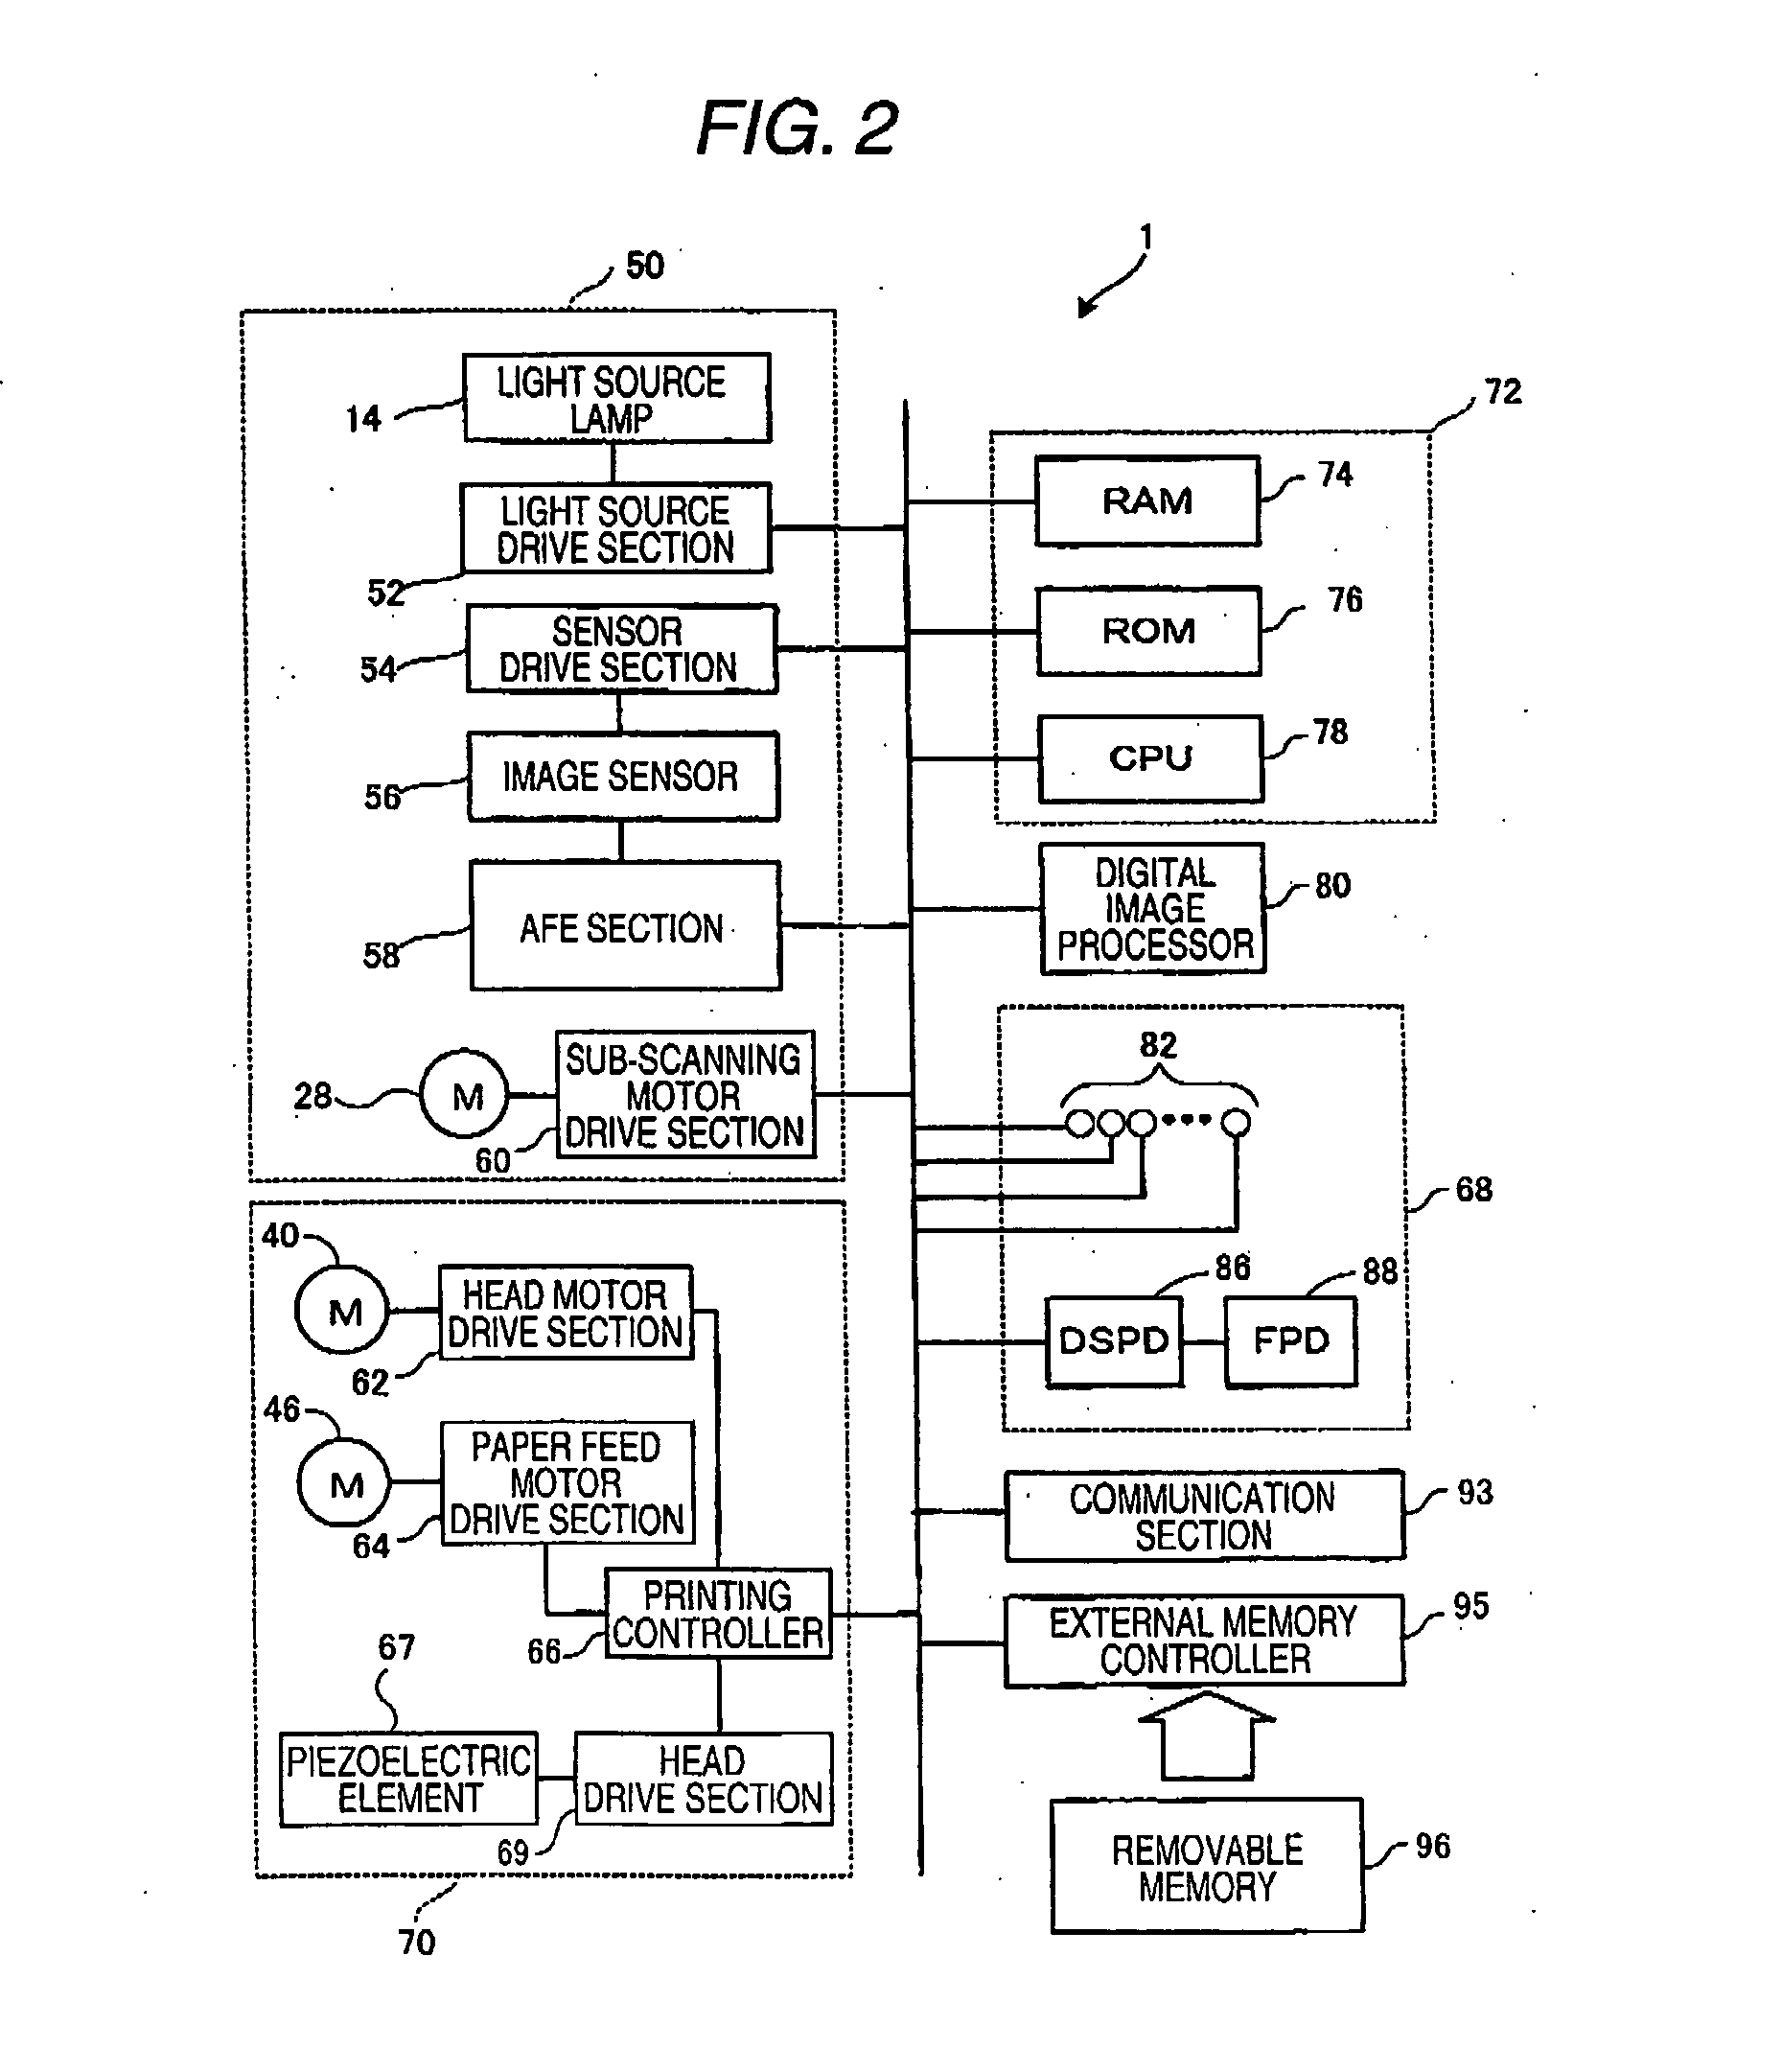 Composite image forming system